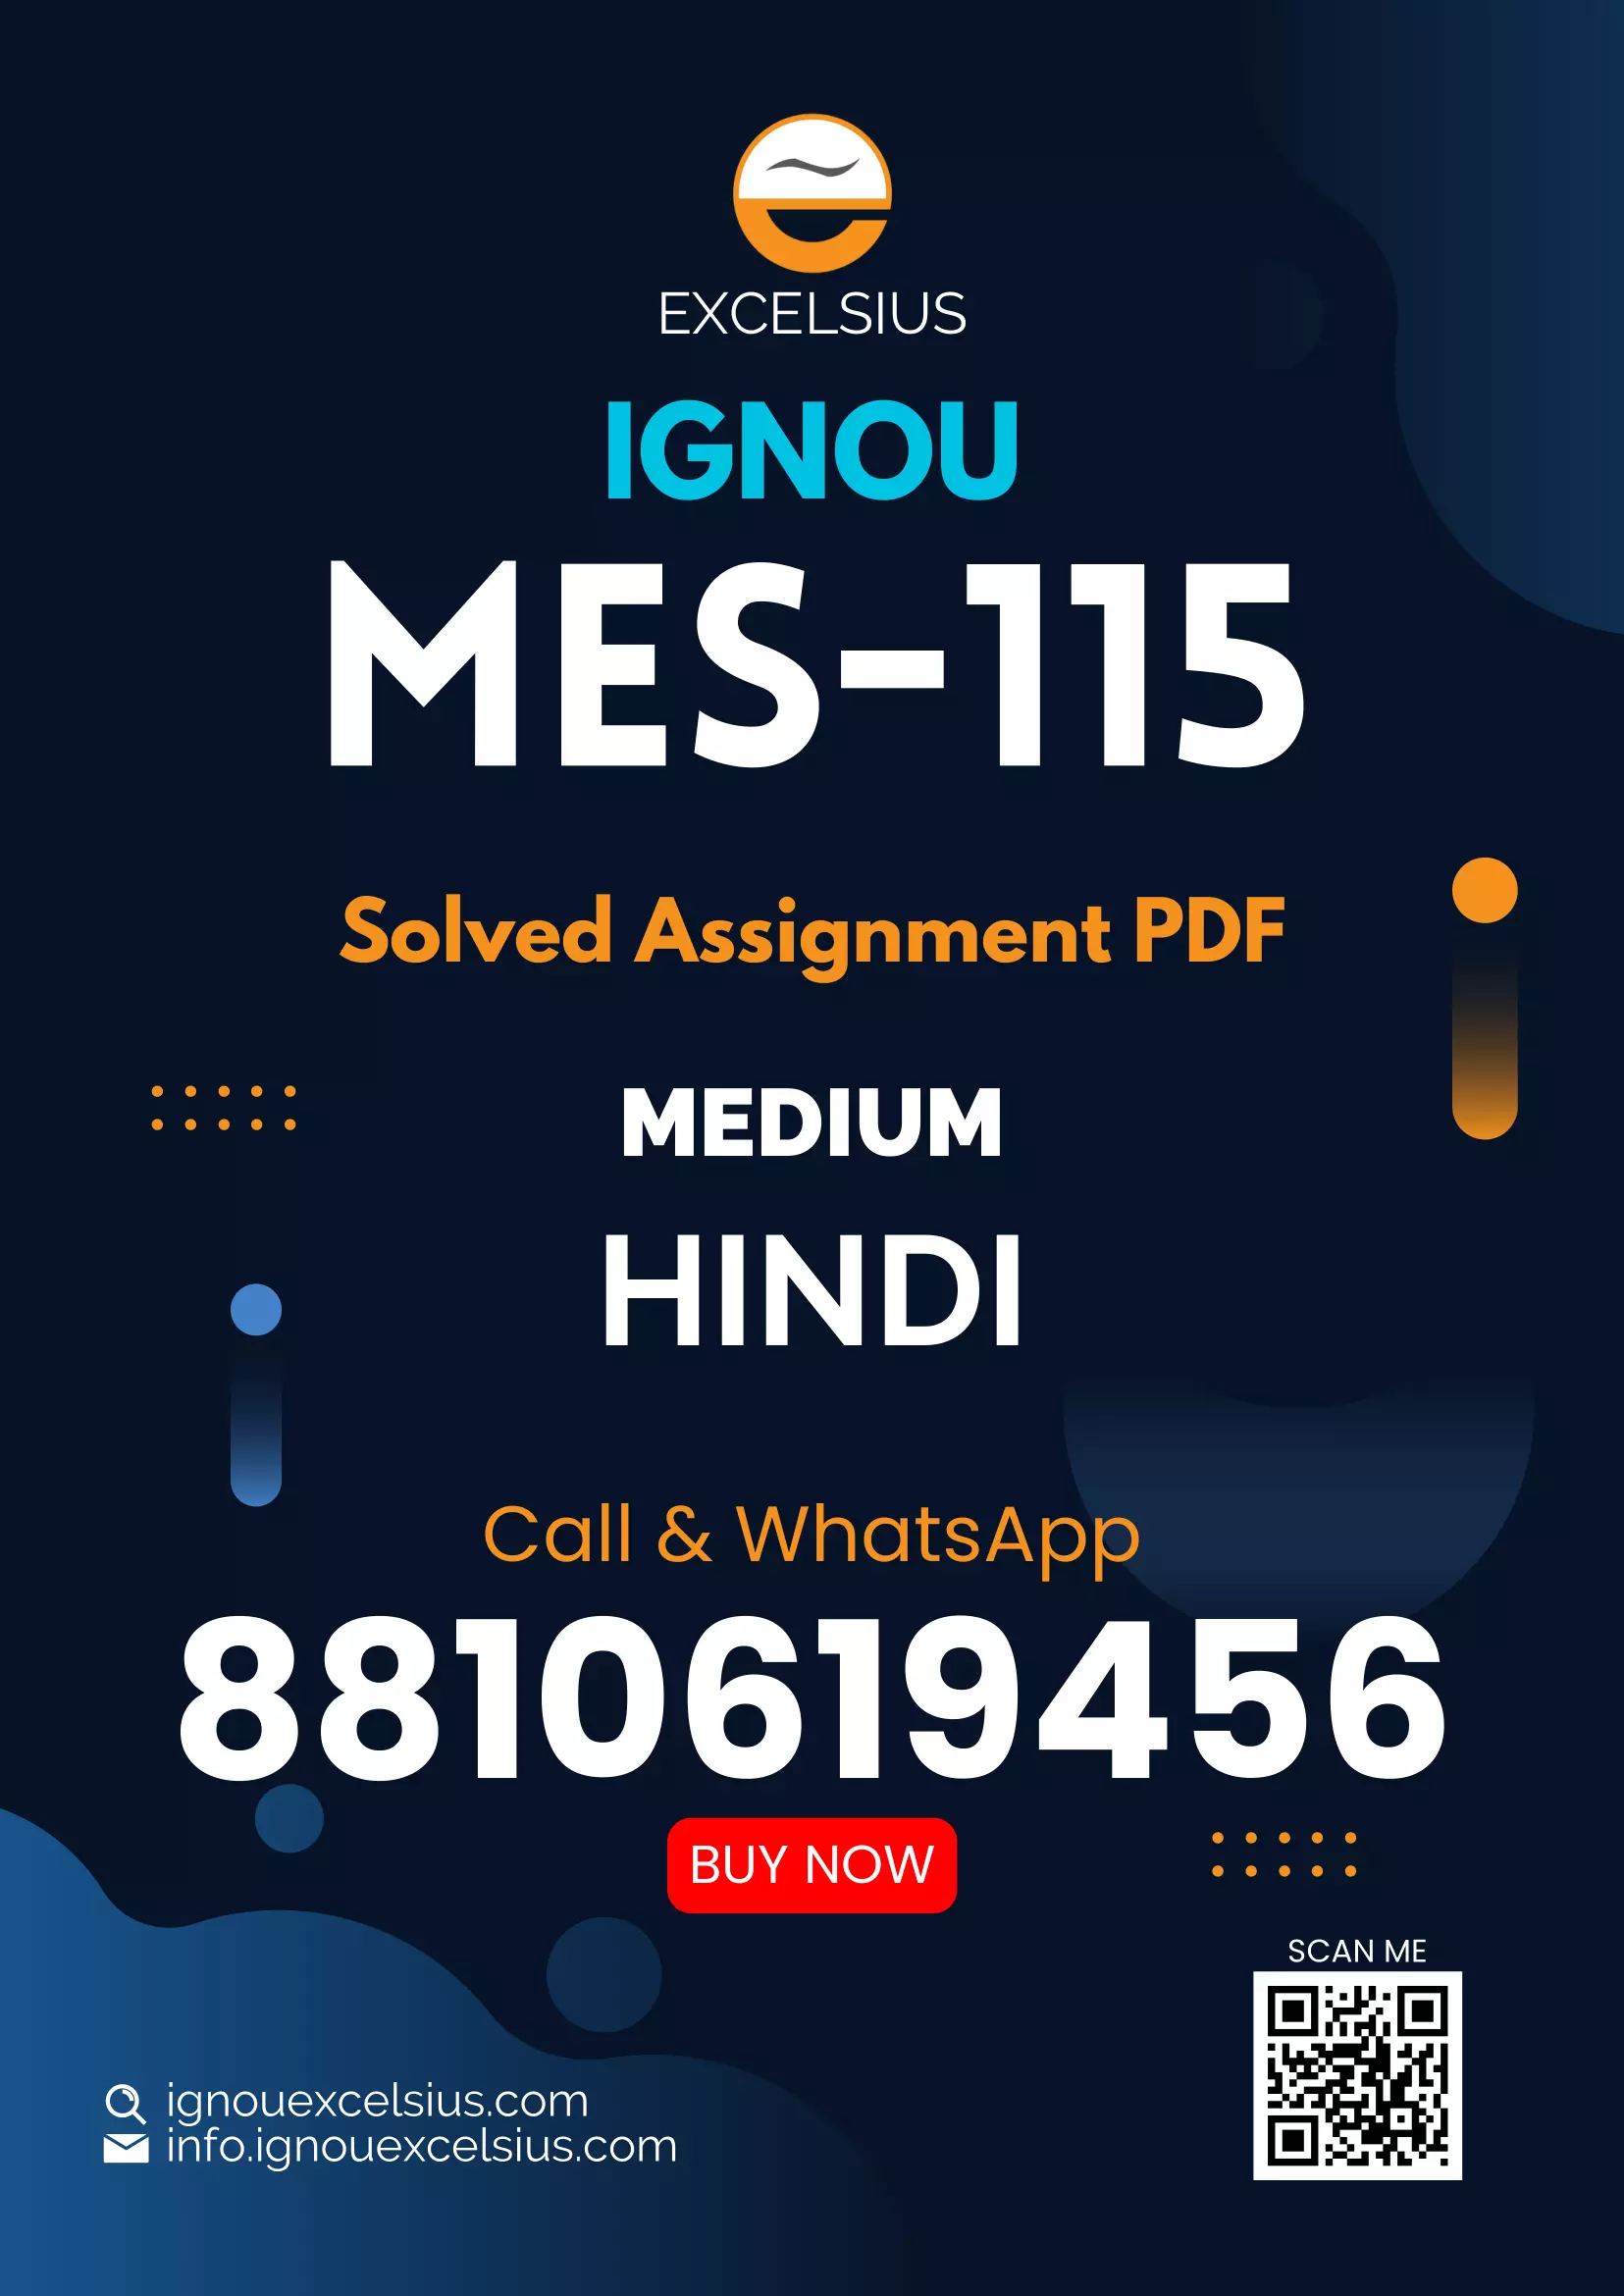 IGNOU MES-115 - Communication Technology for Distance Education, Latest Solved Assignment-January 2023 - July 2023